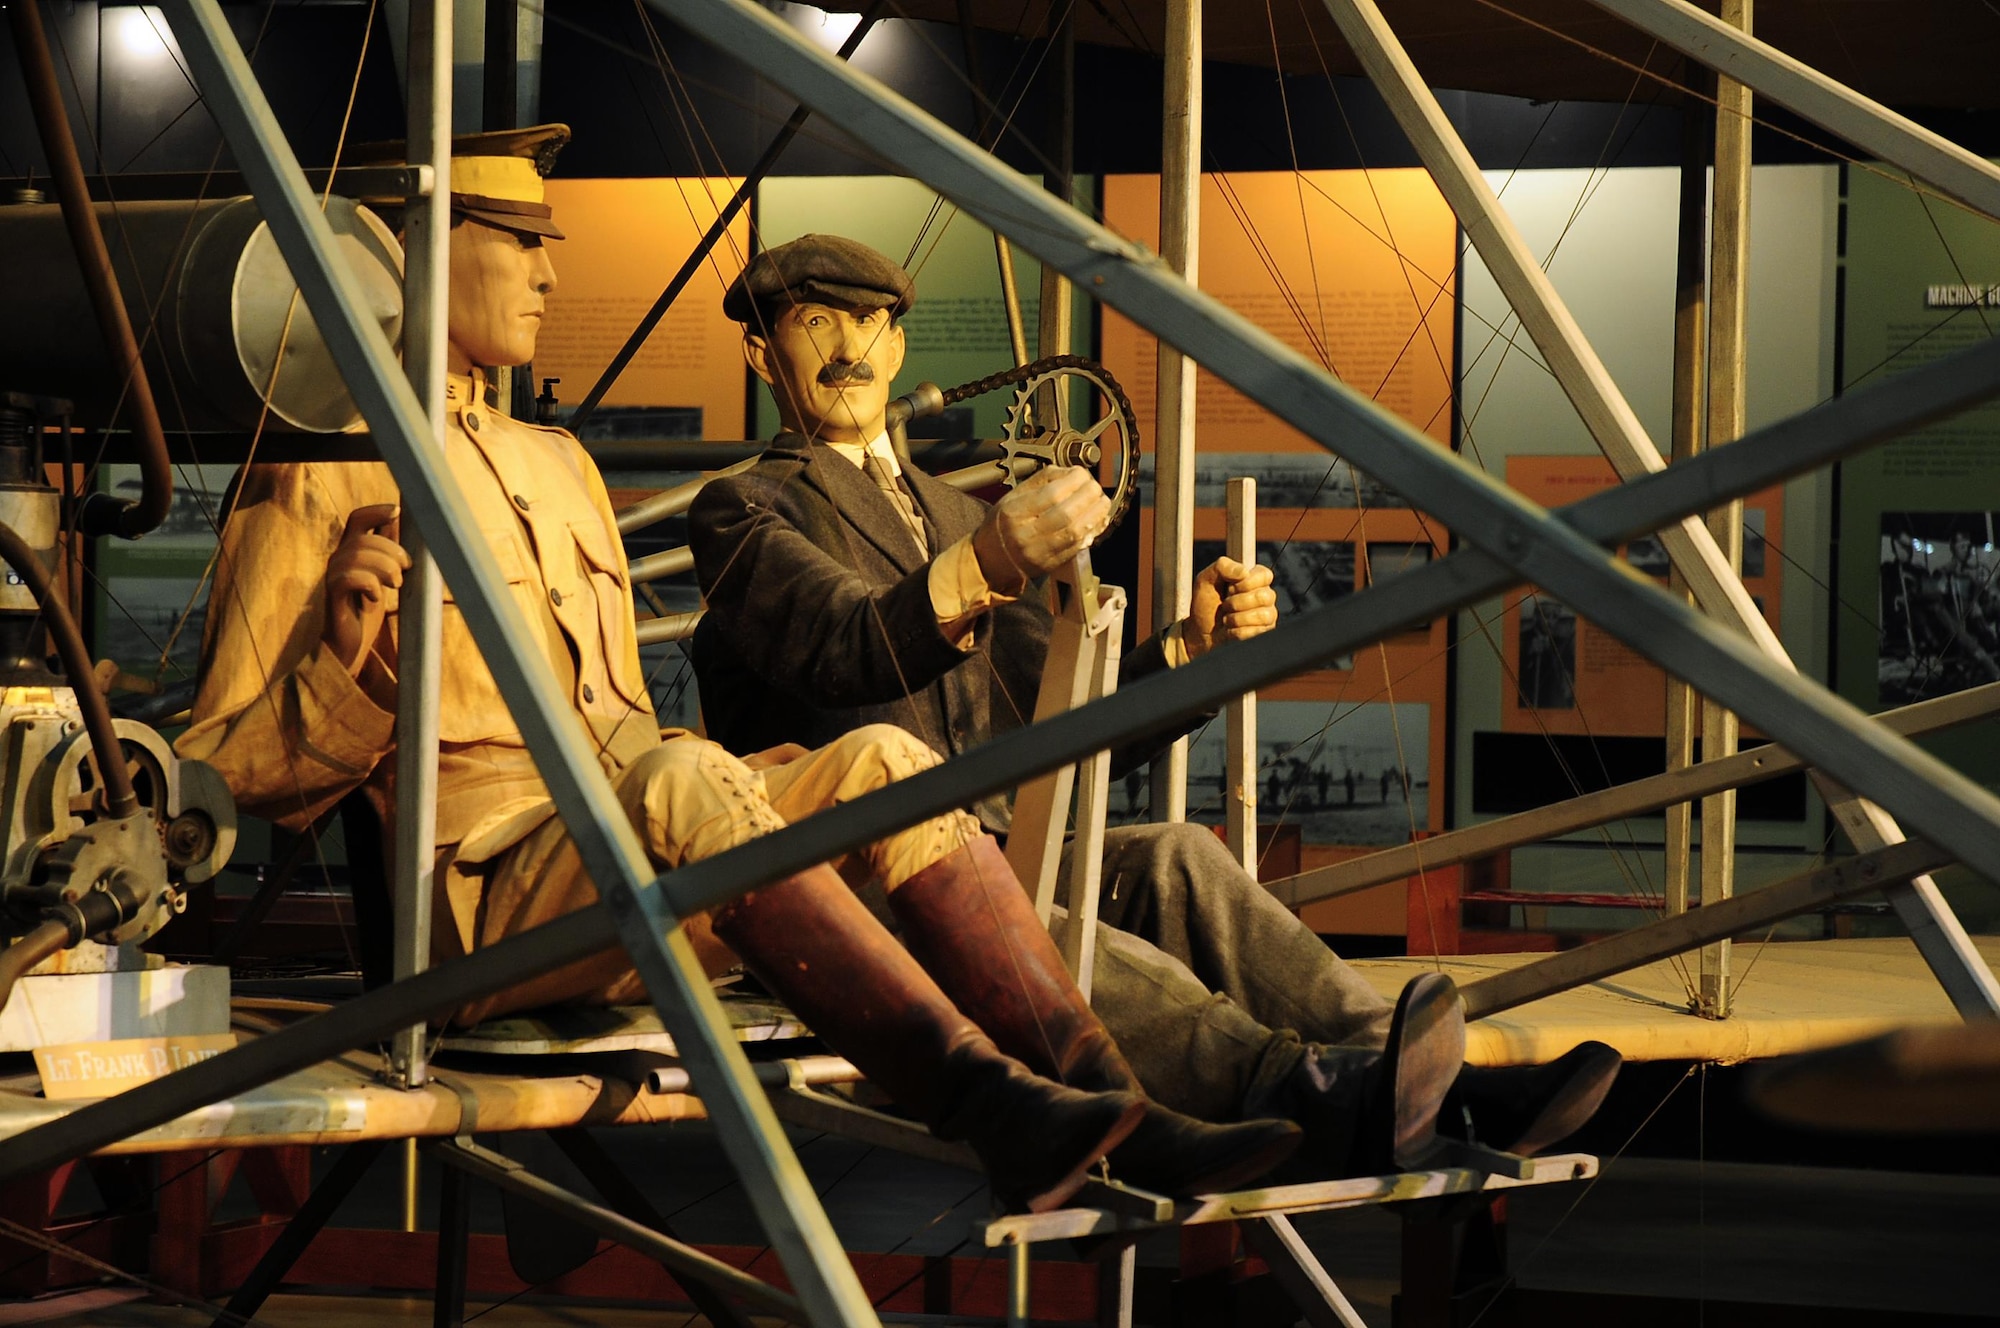 DAYTON, Ohio -- Wright 1909 Military Flyer in the Early Years Gallery at the National Museum of the United States Air Force. (U.S. Air Force photo by Ken LaRock)